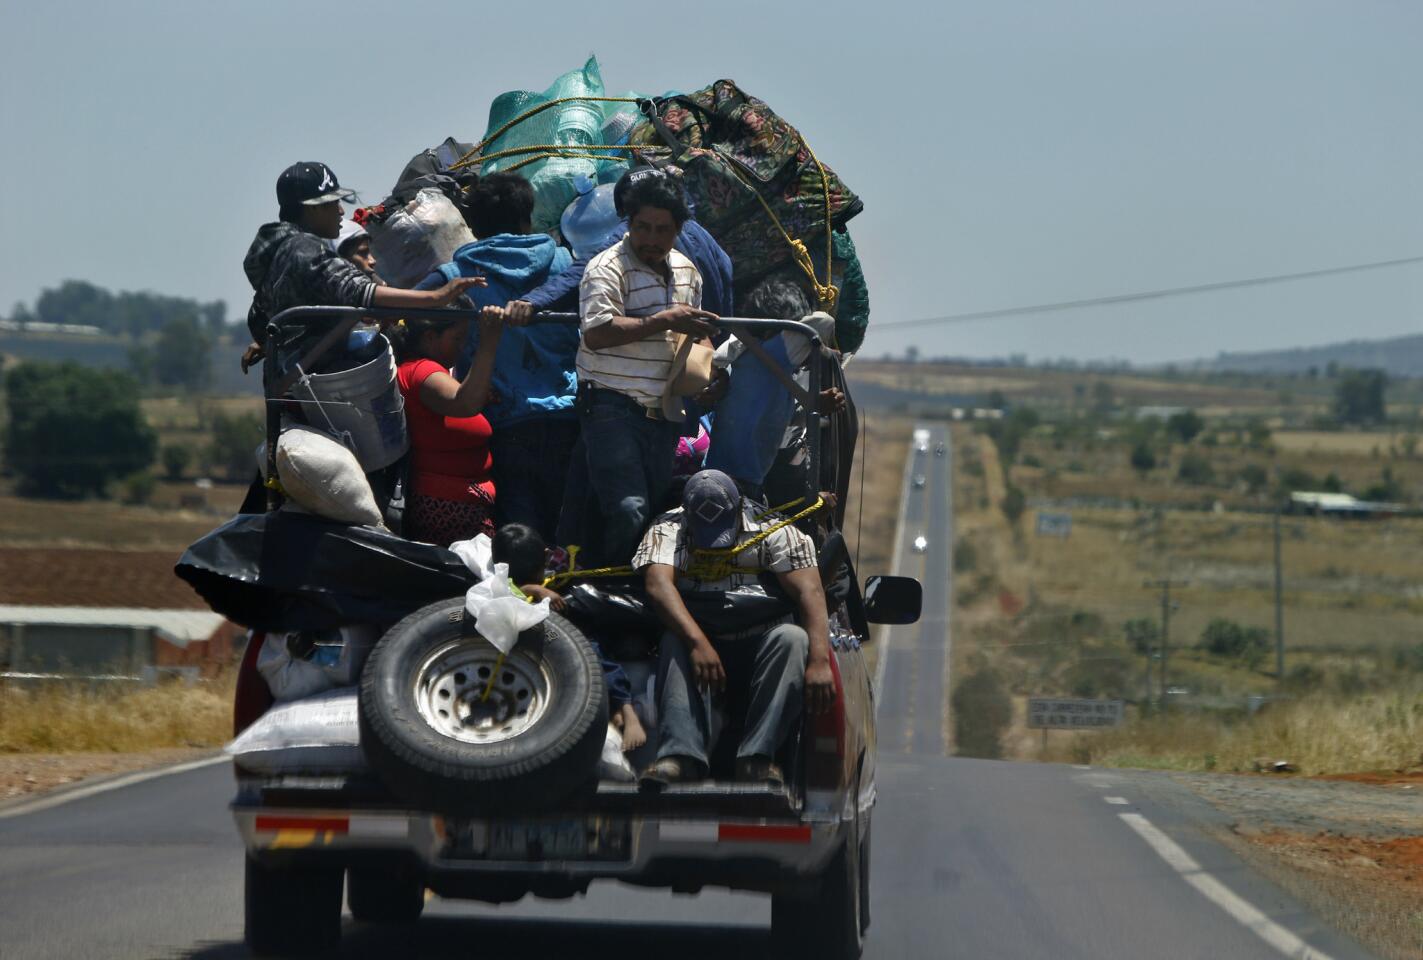 Alejandrina Castillo and her family travel from Sinaloa to a farm pueblo near Leon, Guanajuato. Those on the tailgate secure themselves with rope to avoid spilling out.